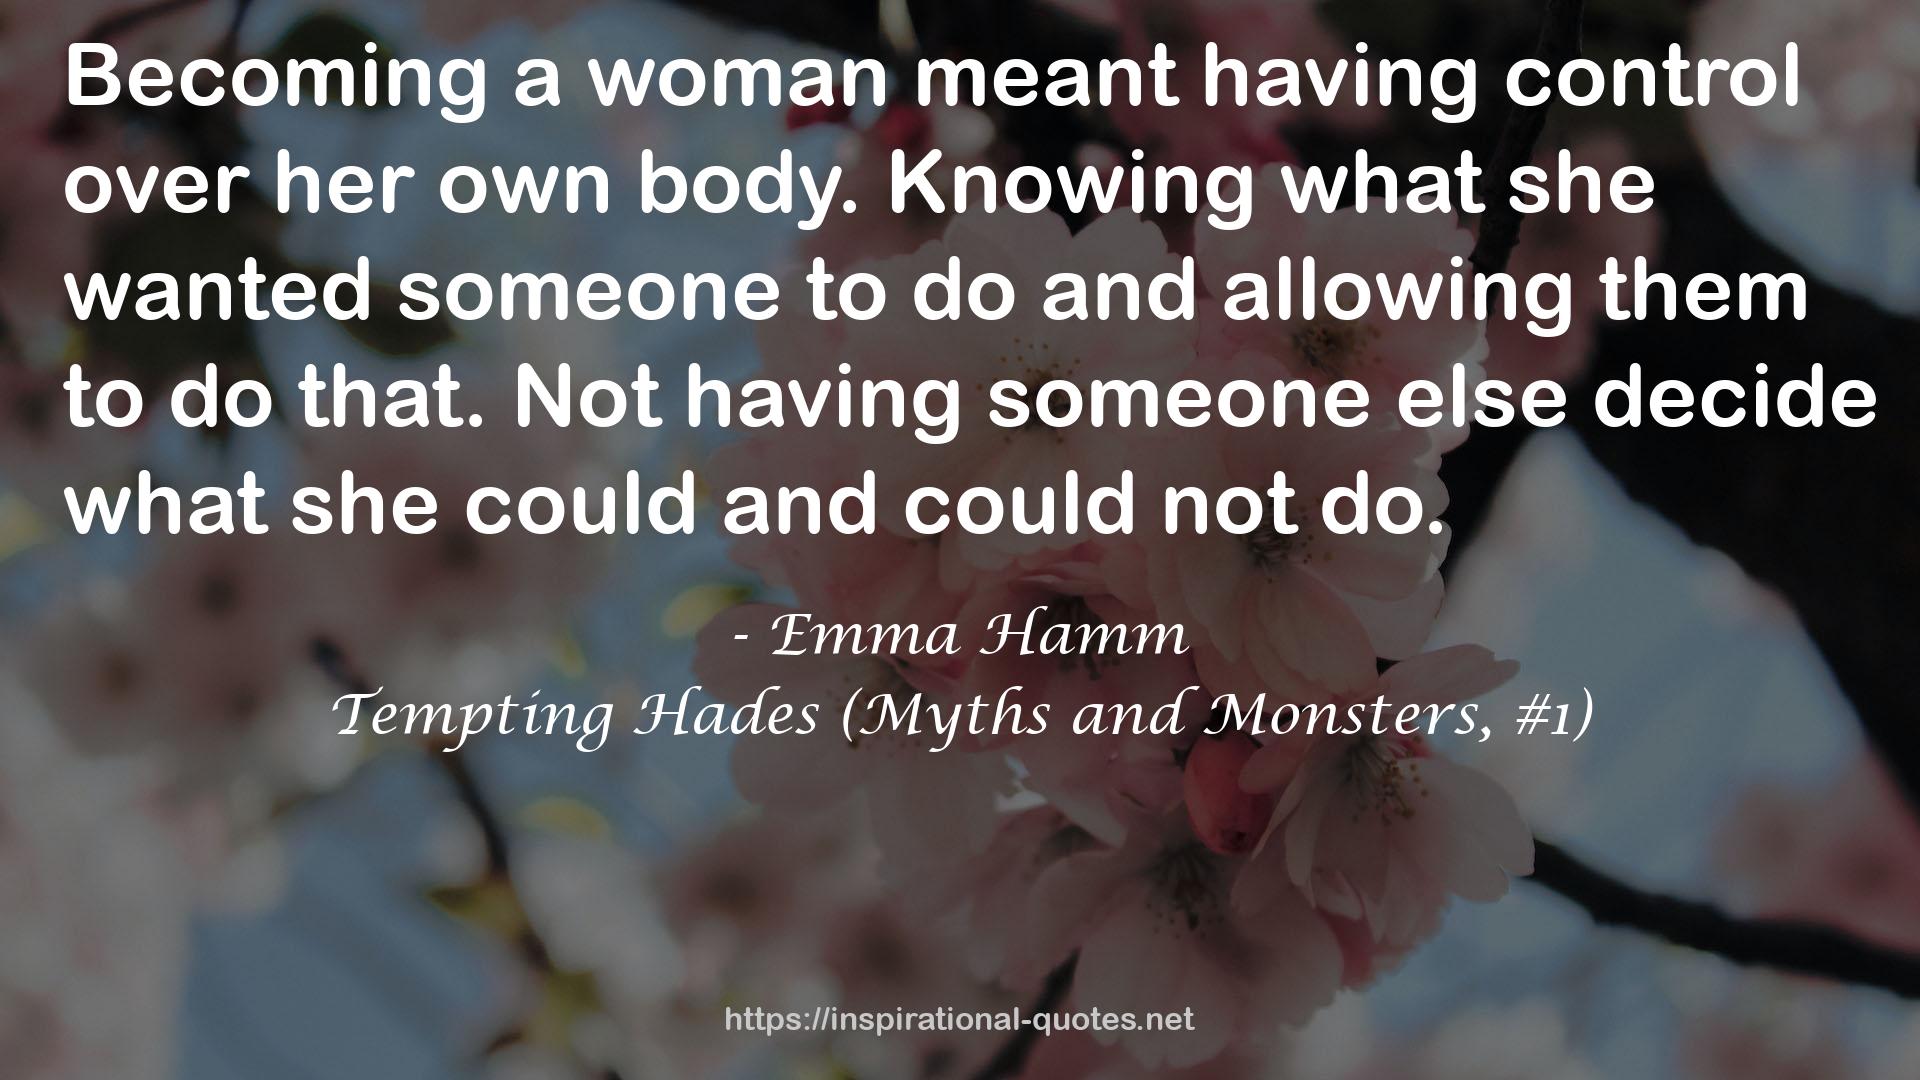 Tempting Hades (Myths and Monsters, #1) QUOTES